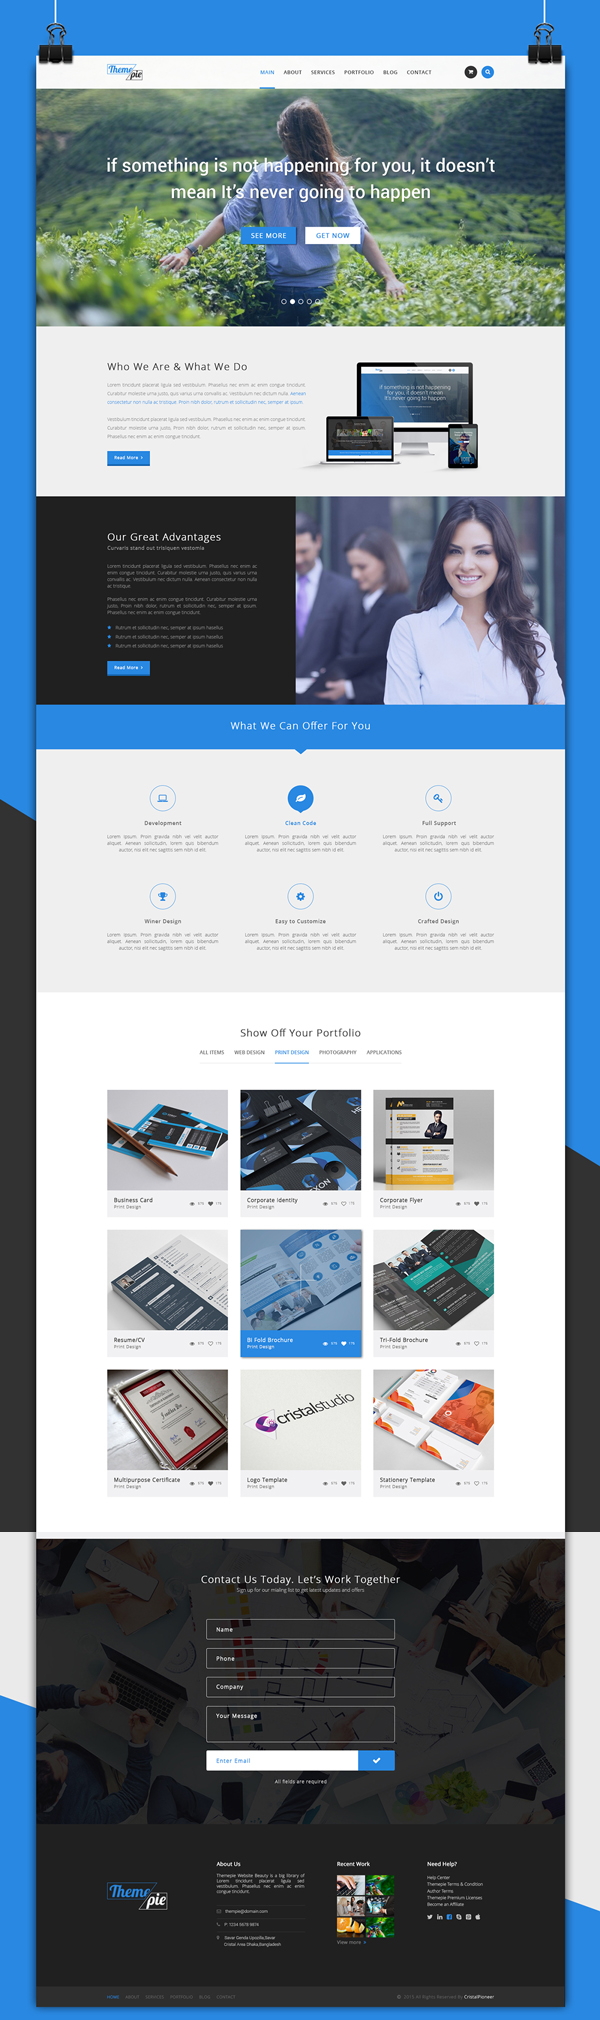 Themepie - Free One Page PSD Web Template